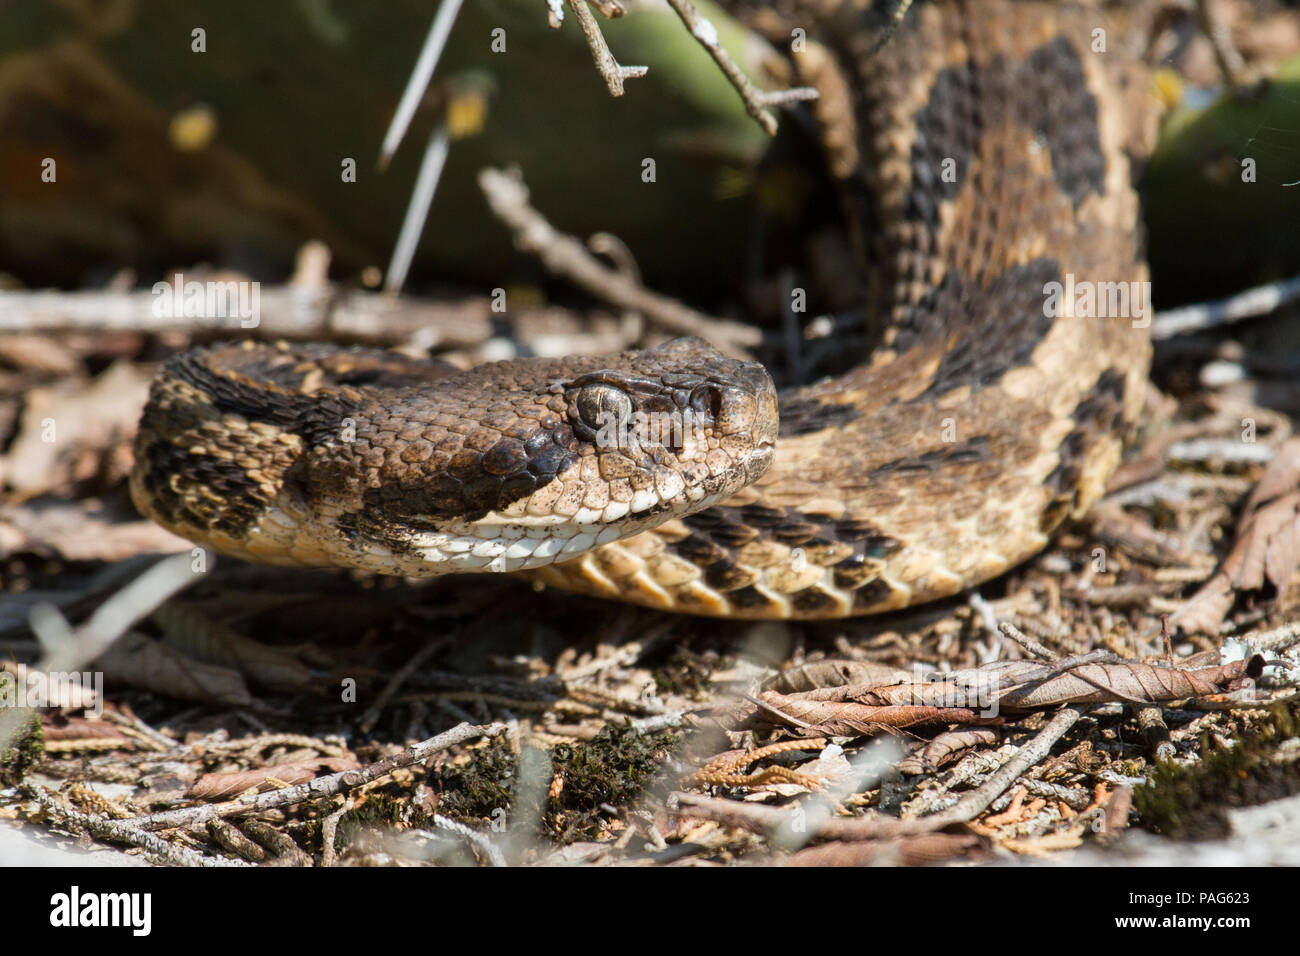 A close-up of a canebrake rattlesnake, Crotalus horridus, showing heat sensing pits and nostrils. Stock Photo